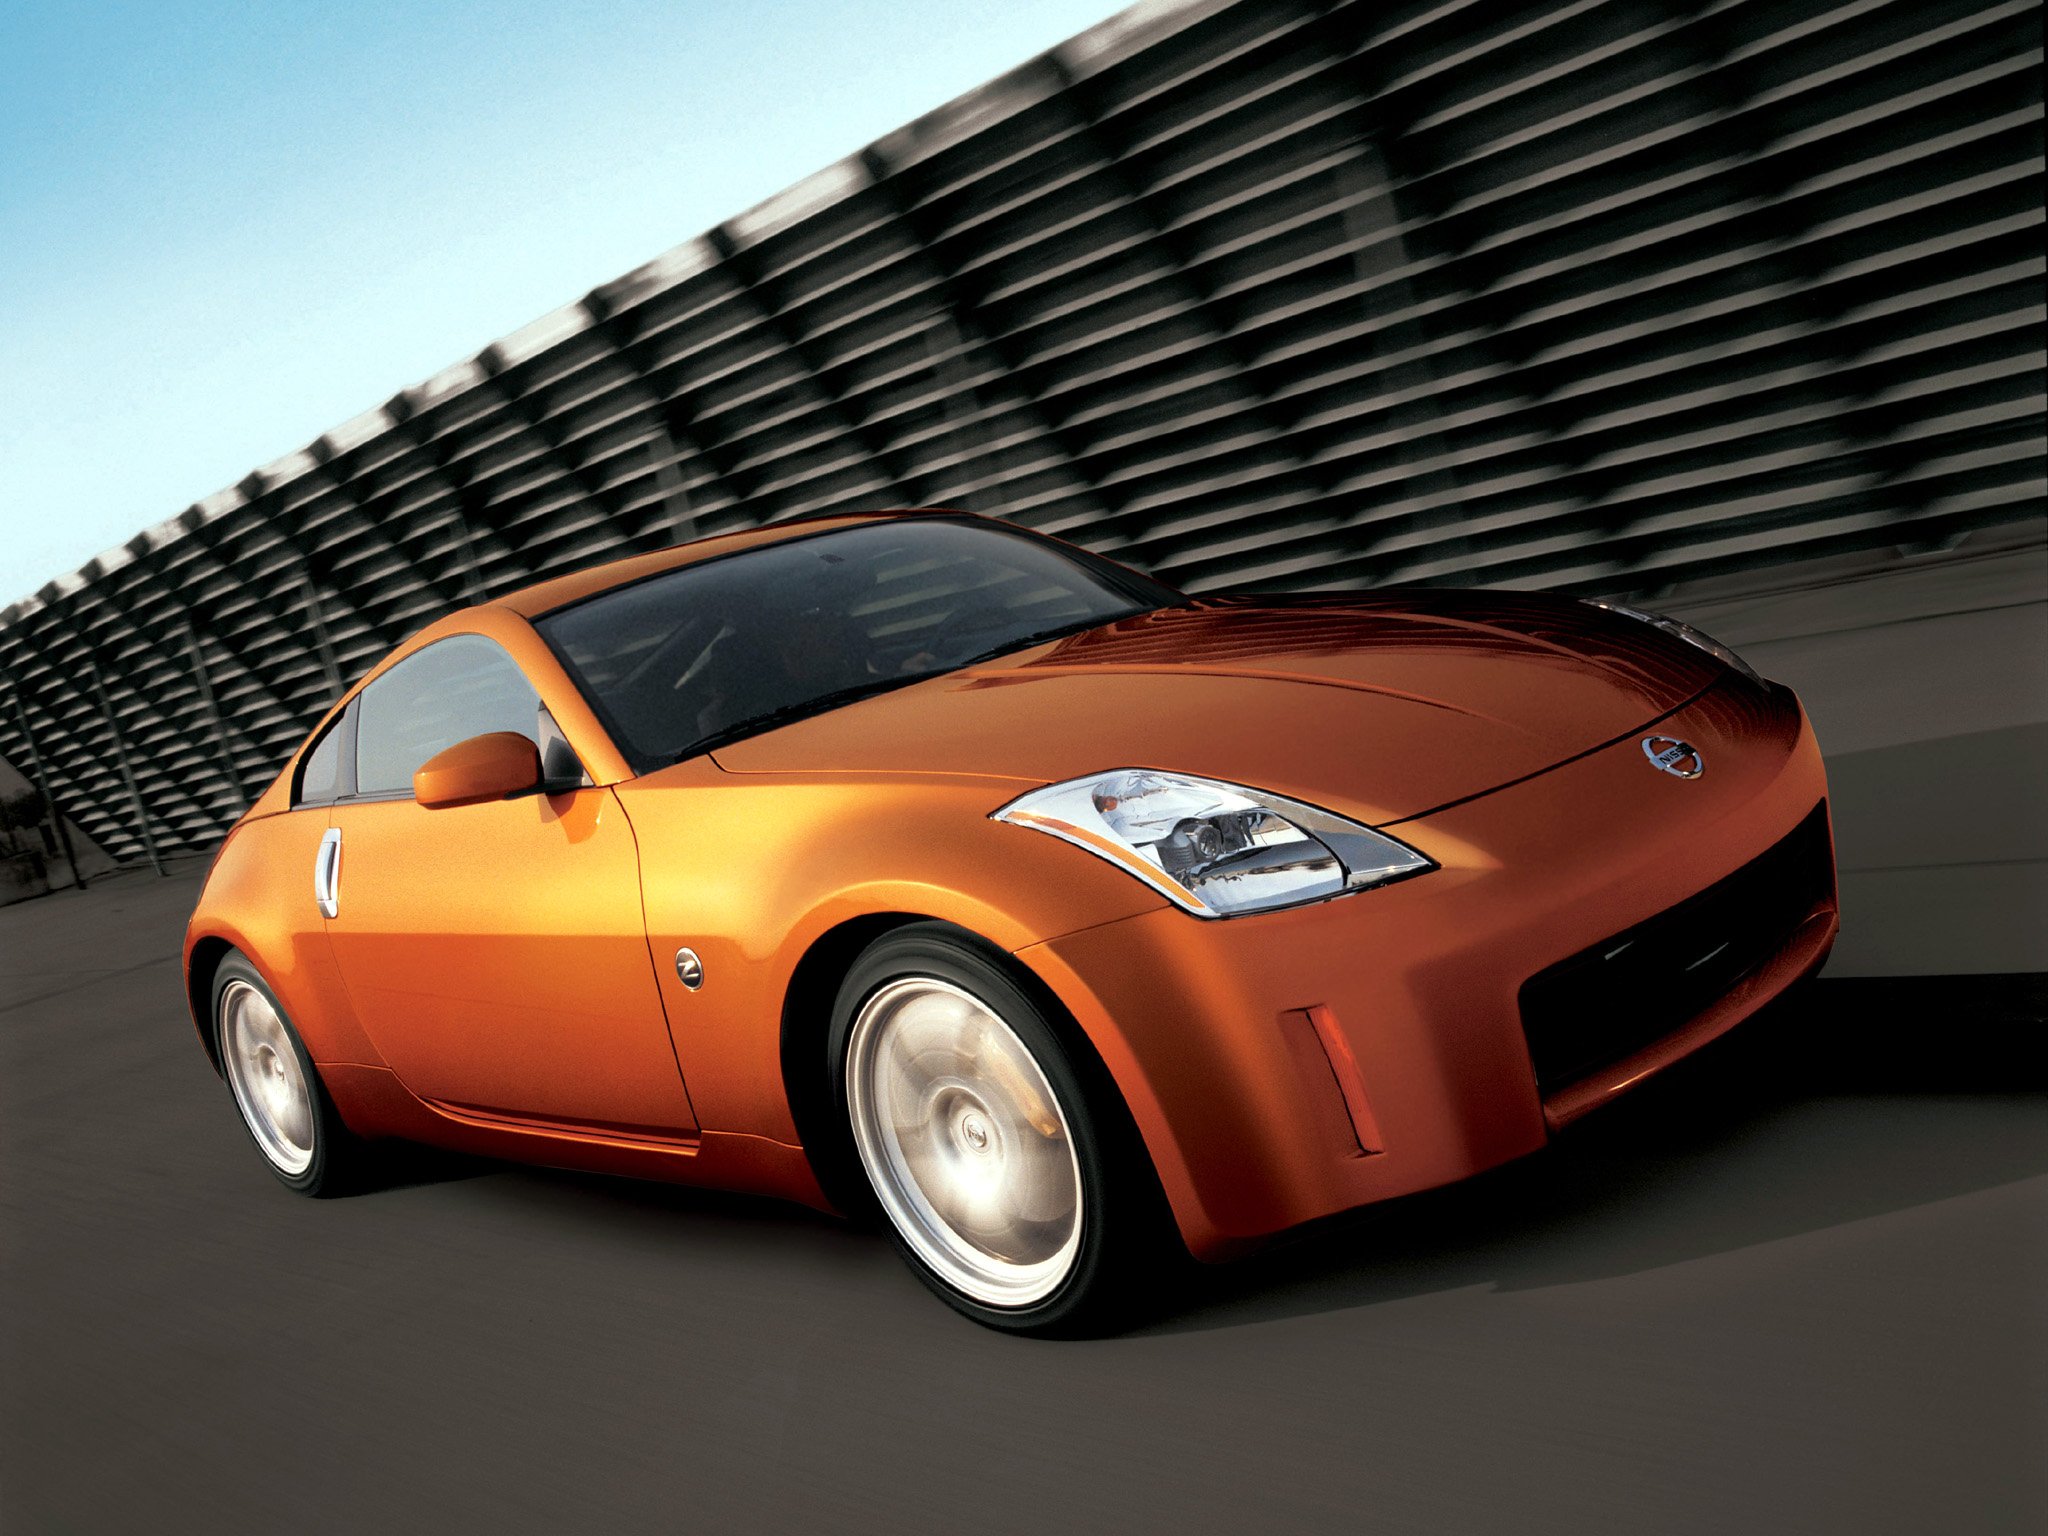 nissan, 350z, 35th, Anniversary, 2005, Coupe, Cars Wallpaper